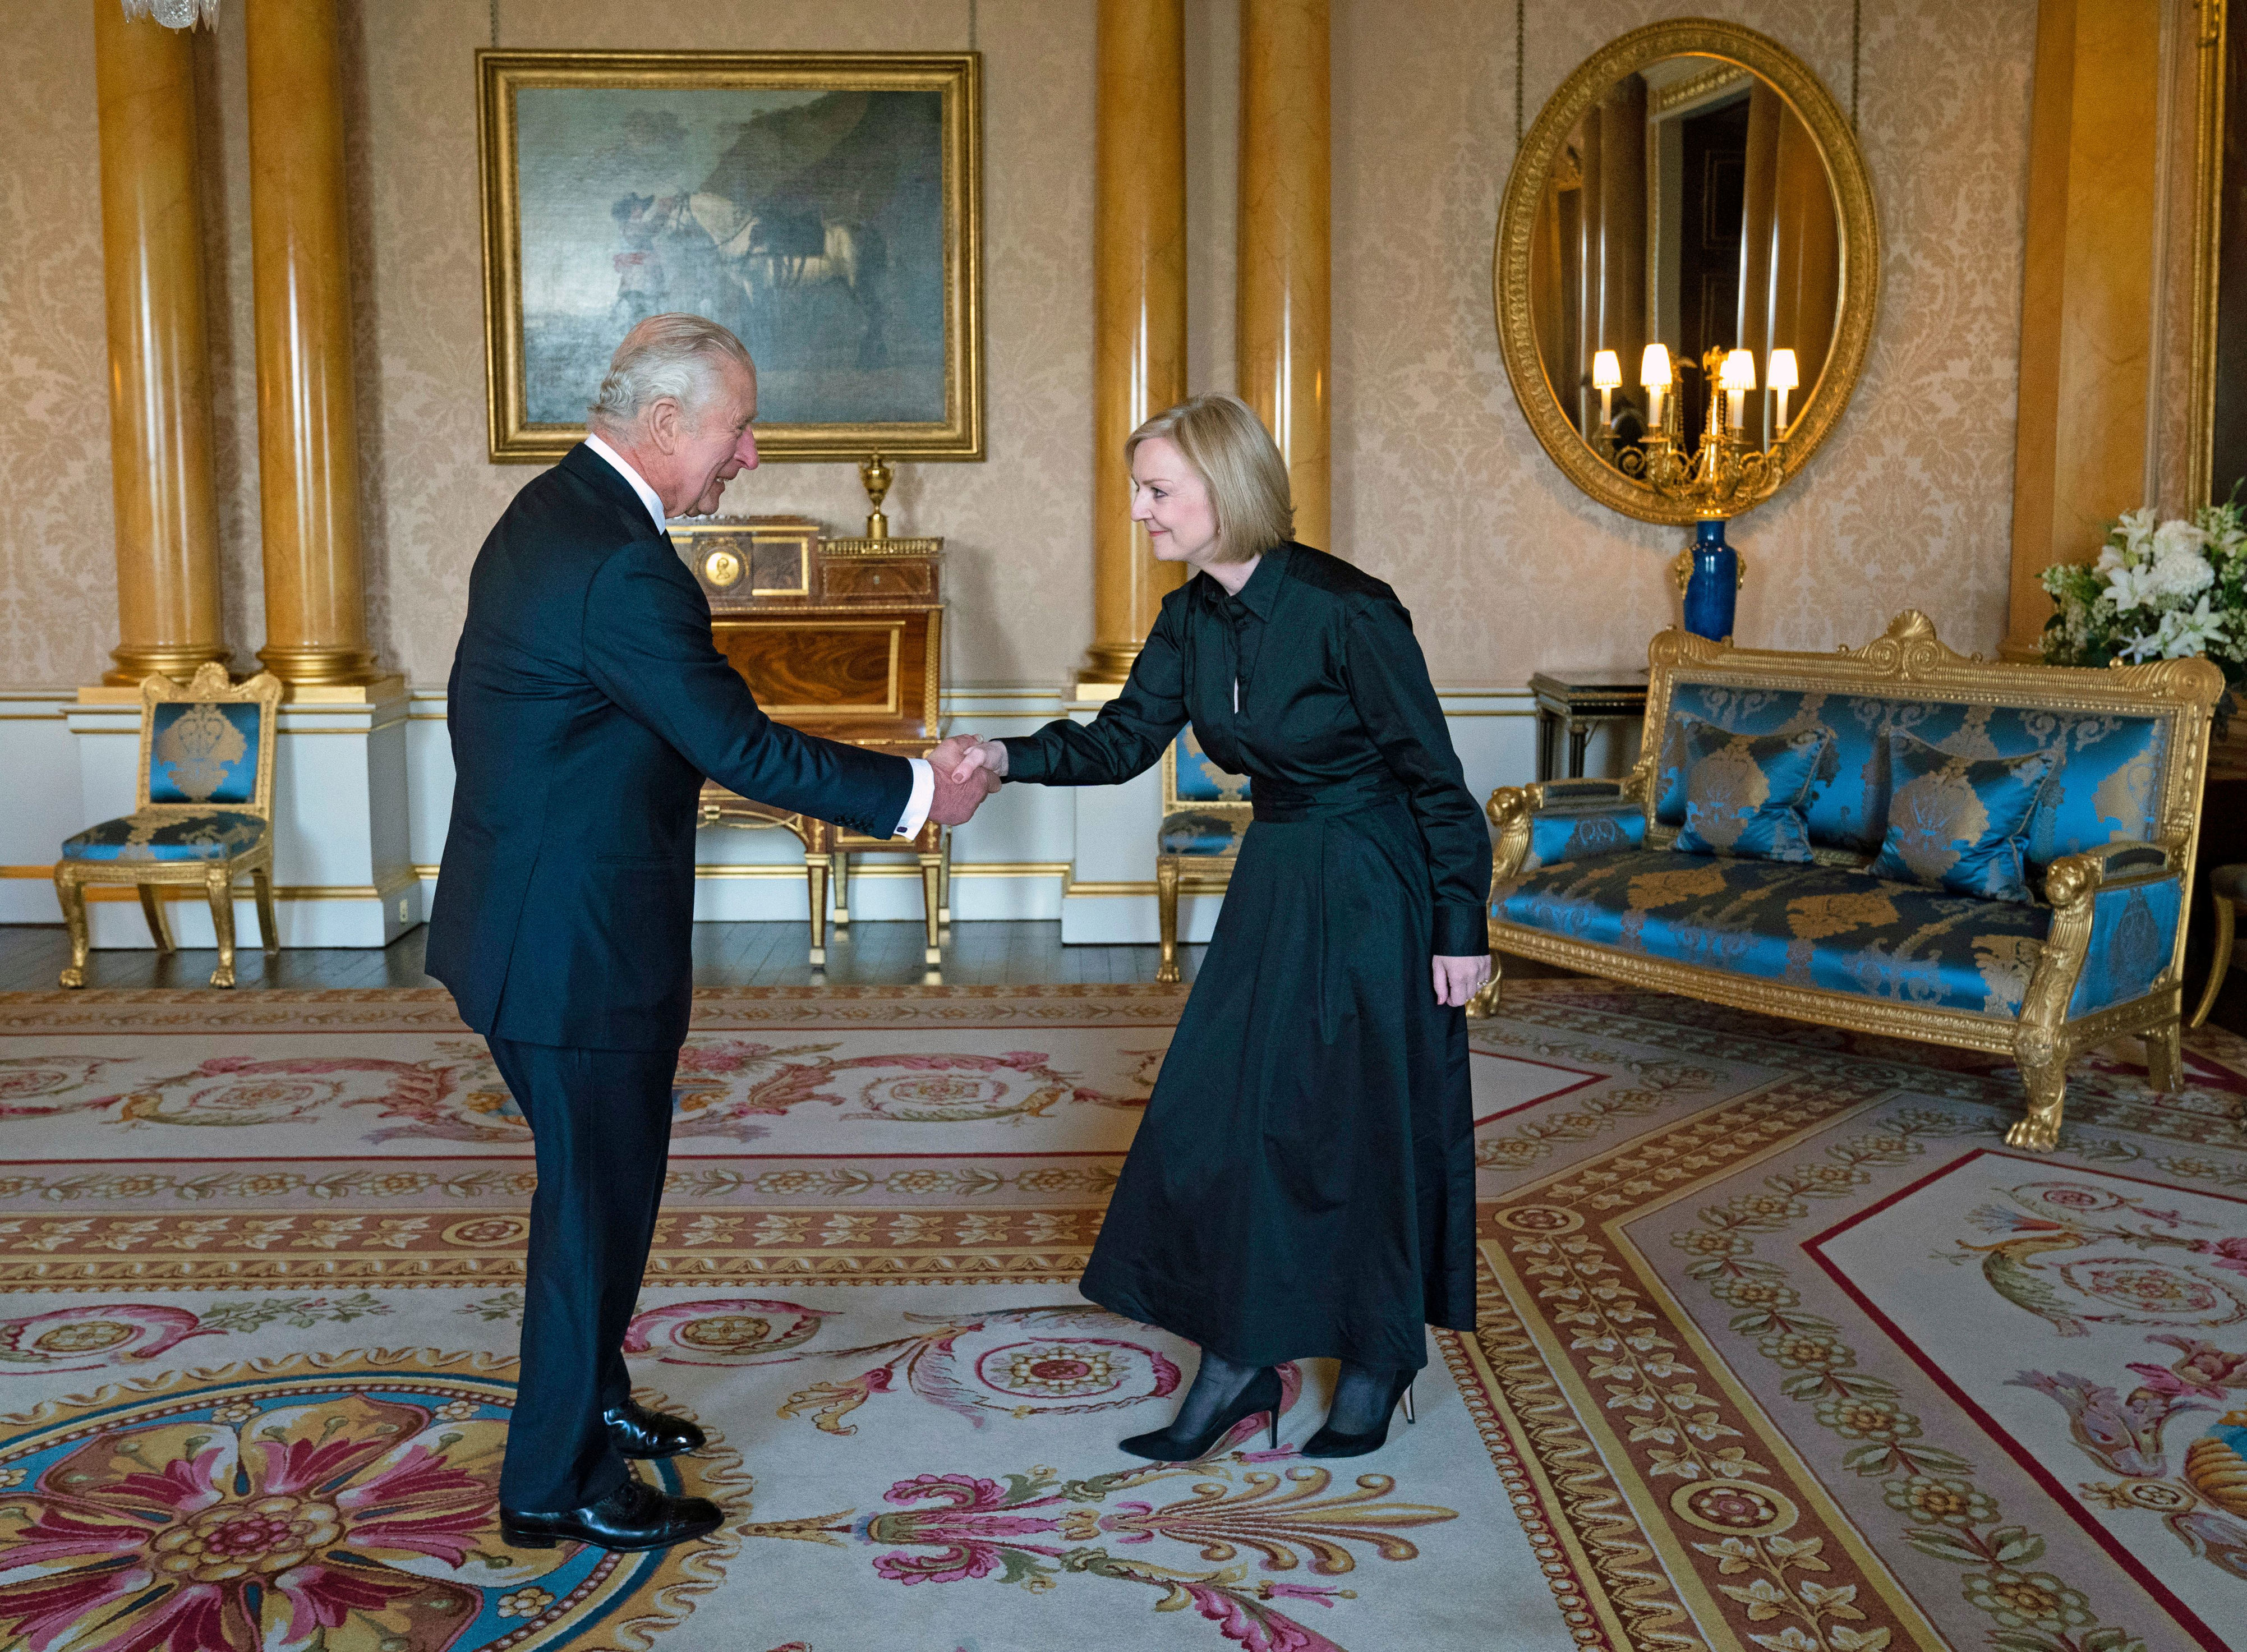 <p>King Charles III received Prime Minister Liz Truss in the 1844 Room at Buckingham Palace in London on Sept. 18, 2022 -- the day before Queen Elizabeth II's state funeral.</p>